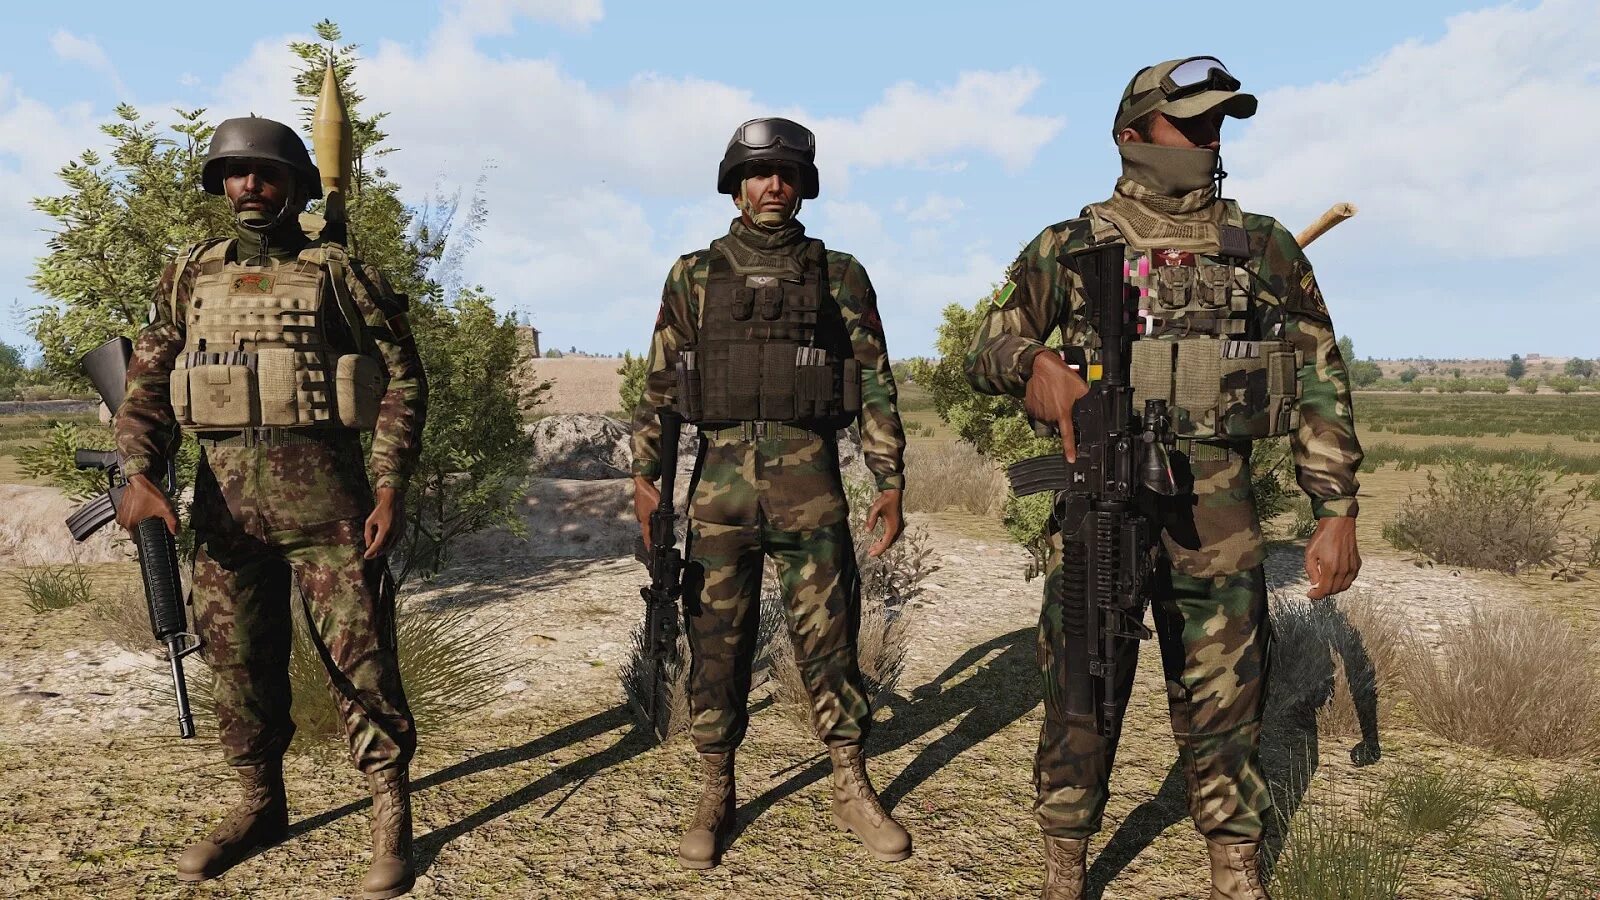 Арма 3 моды русские. Arma 3 Army. Арма 3 2023. Афганка Arma 3. Arma 3 Russian Special Forces.